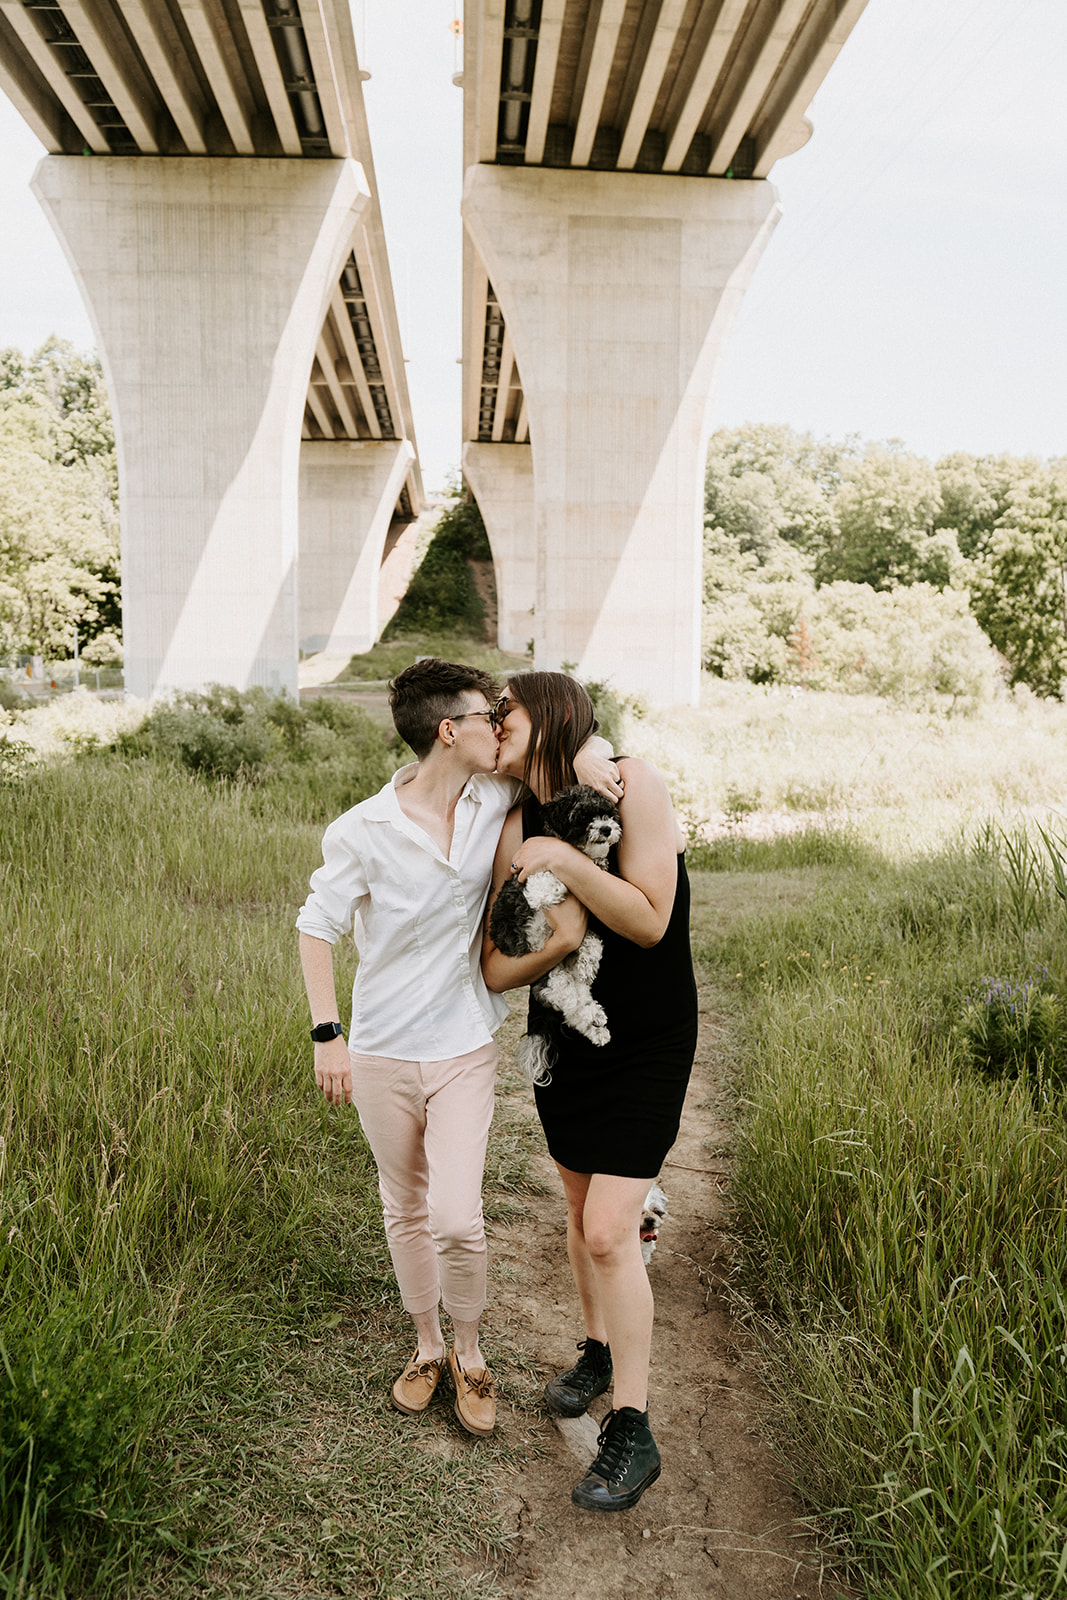 Two people kissing underneath an overpass by the creek.